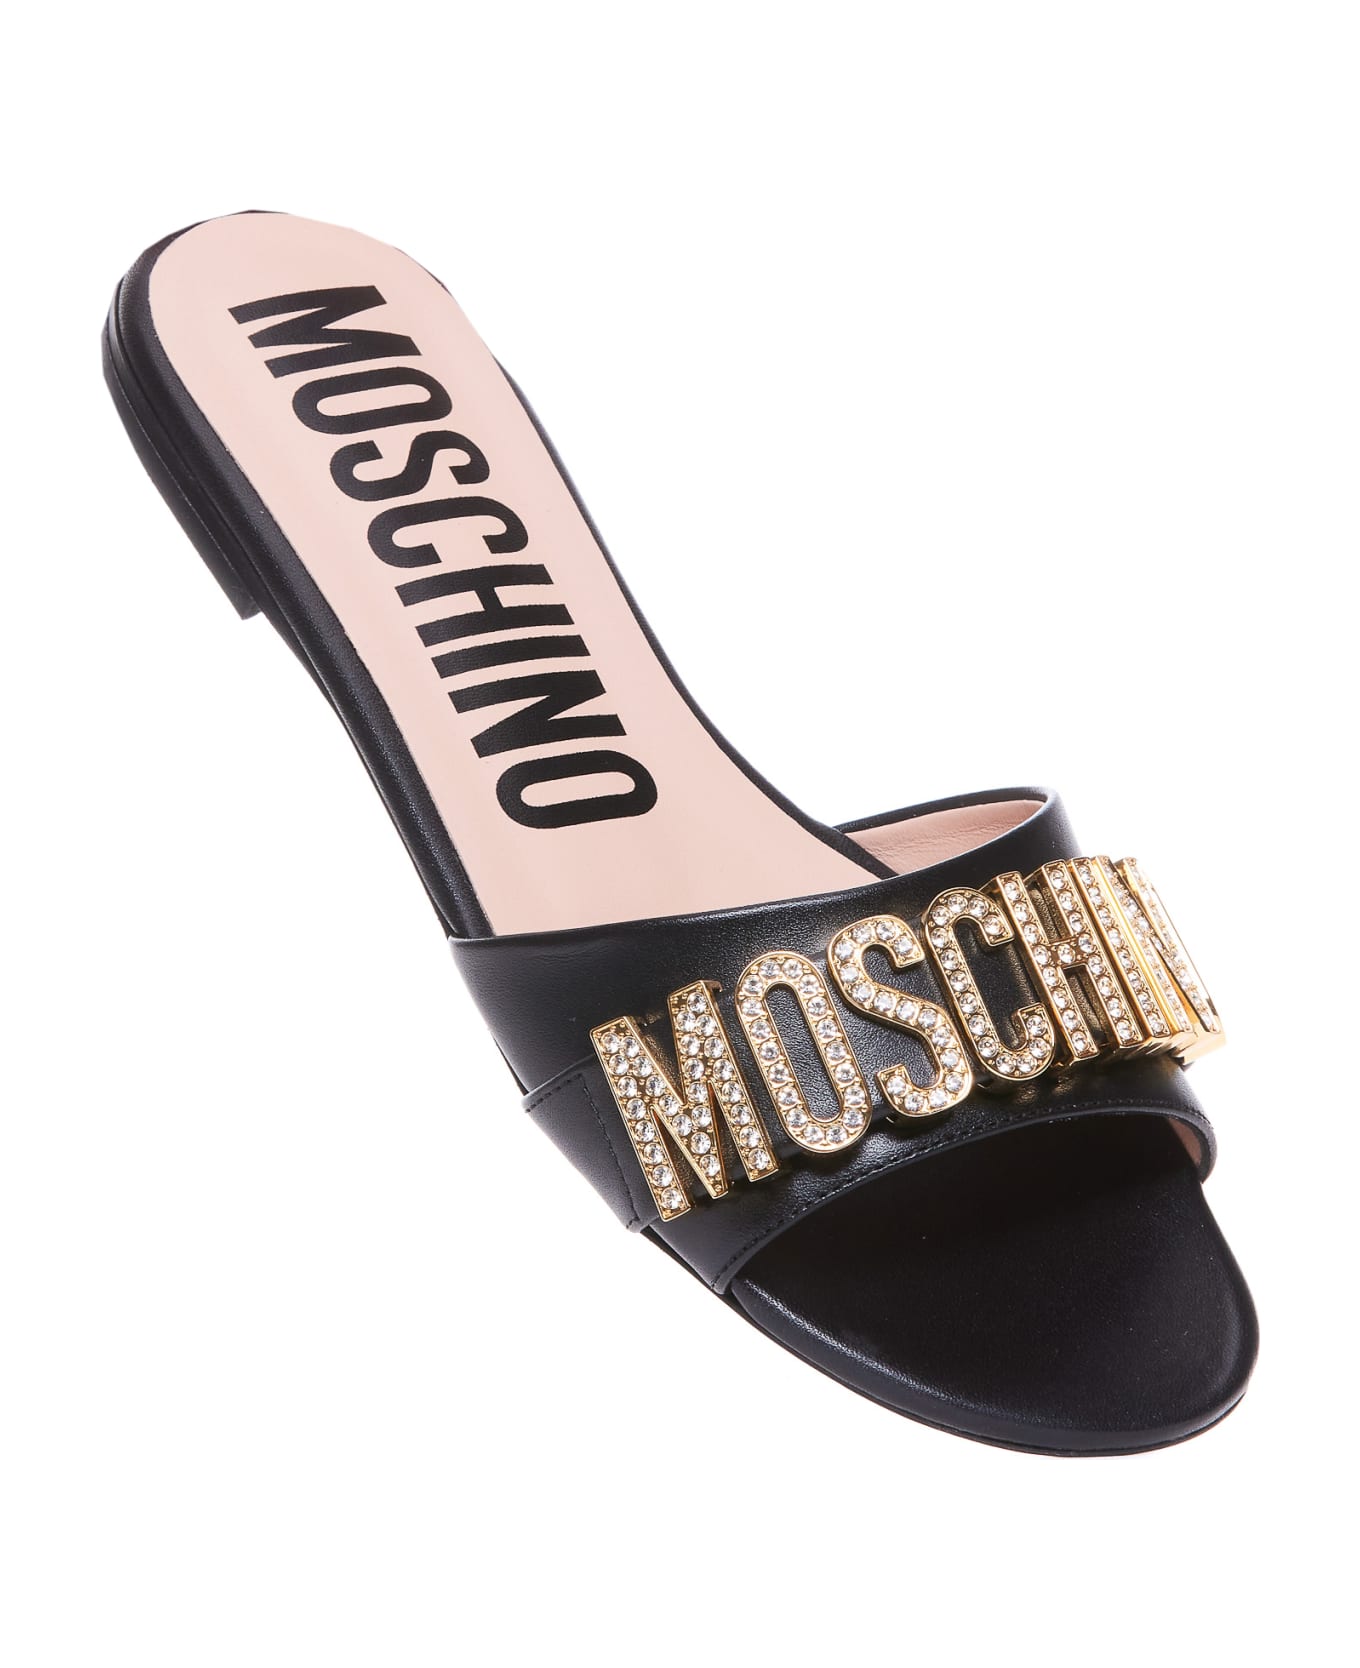 Moschino Maxi Lettering Sandals - Black